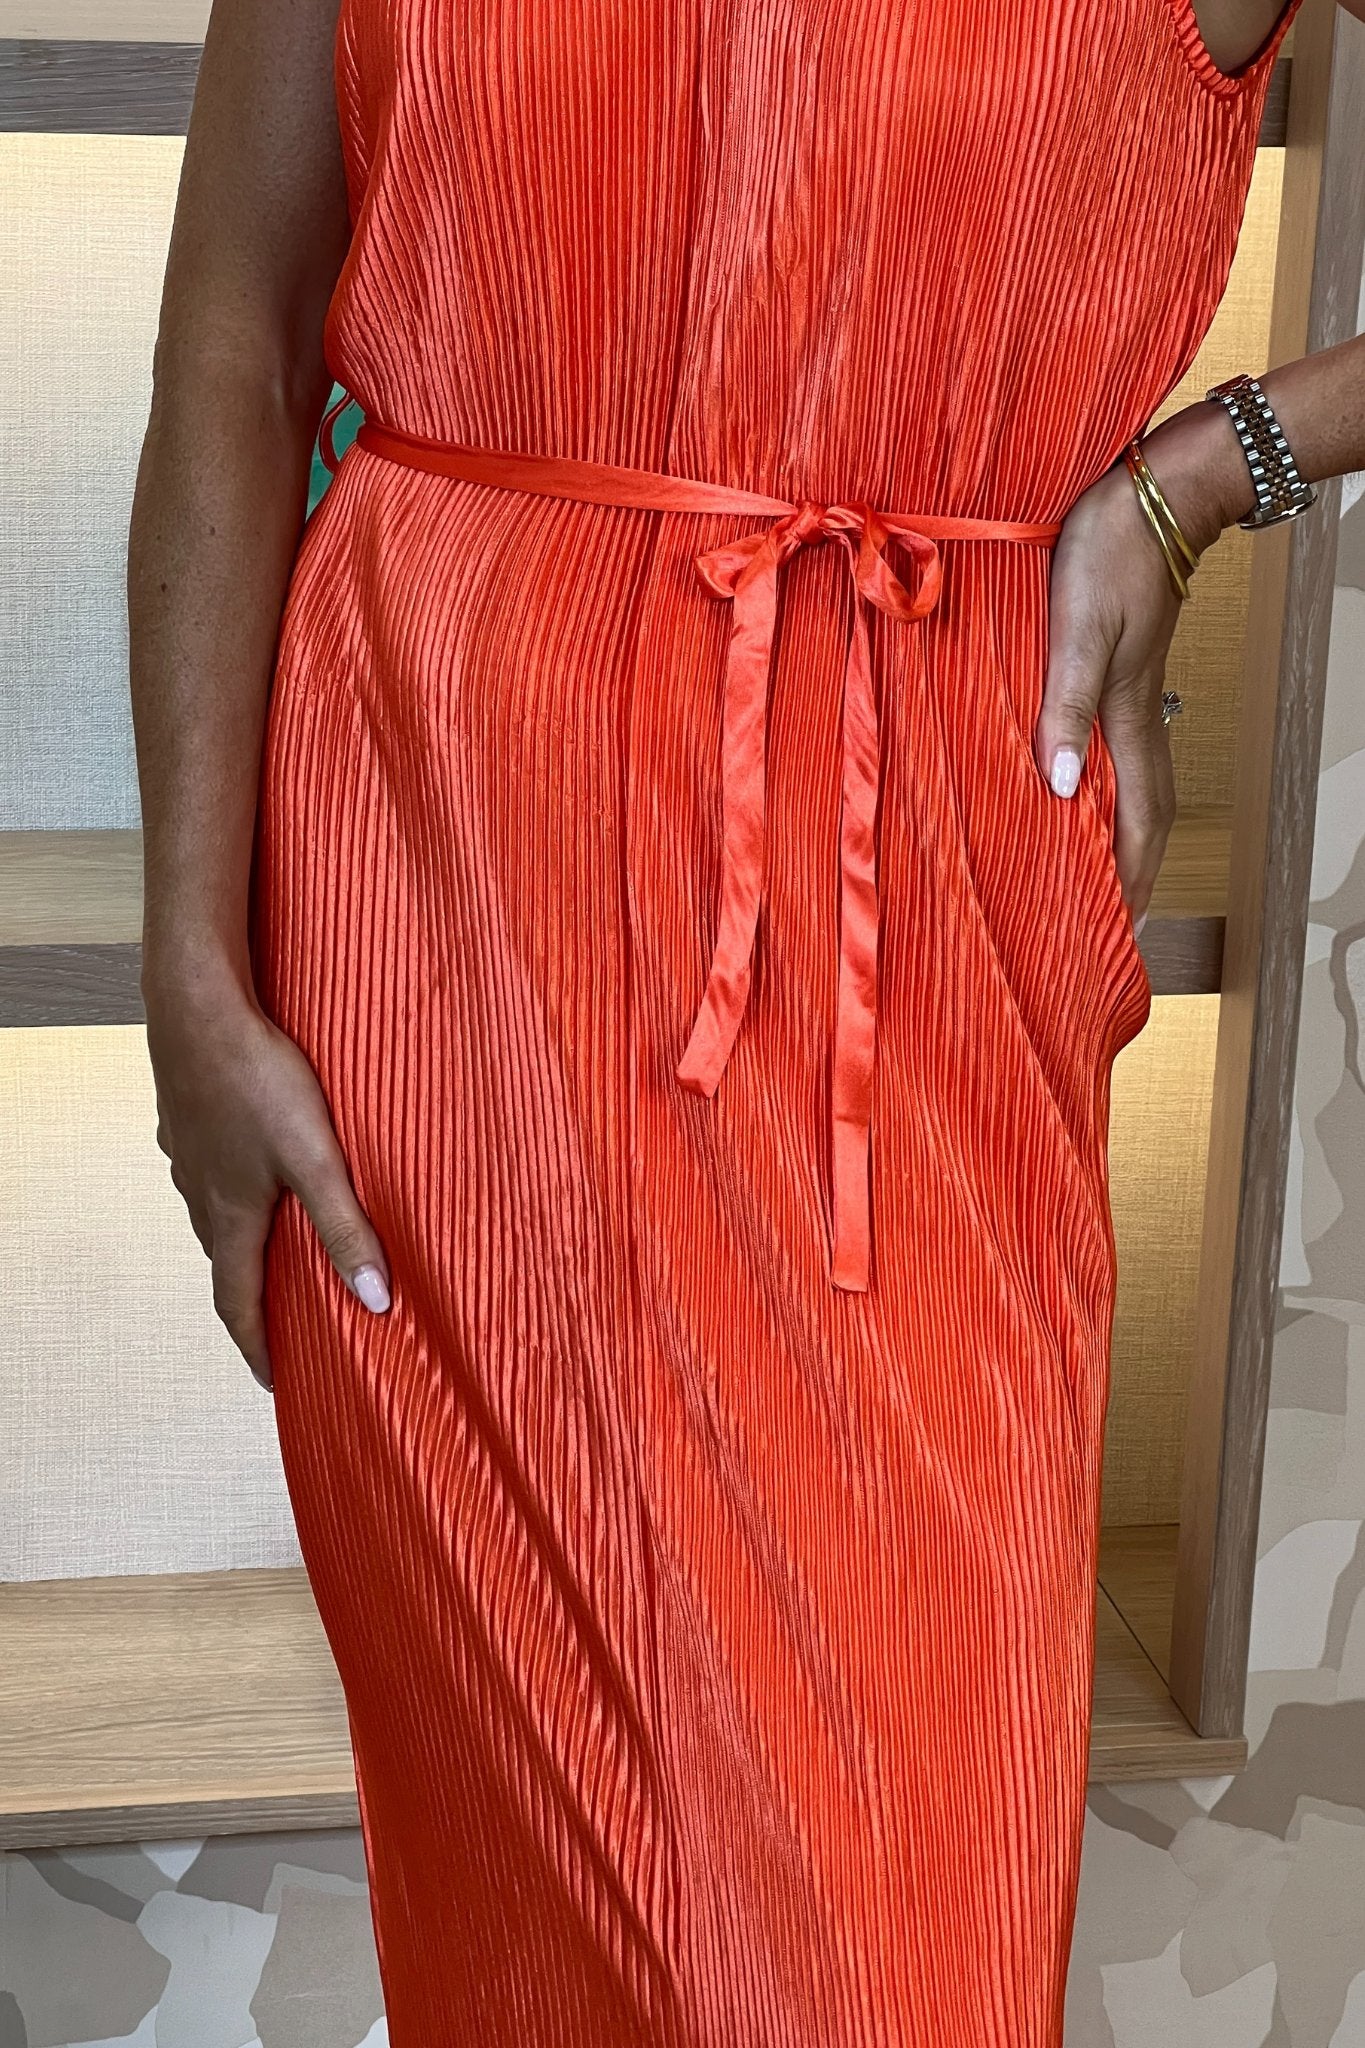 Polly Ribbed Dress In Coral - The Walk in Wardrobe